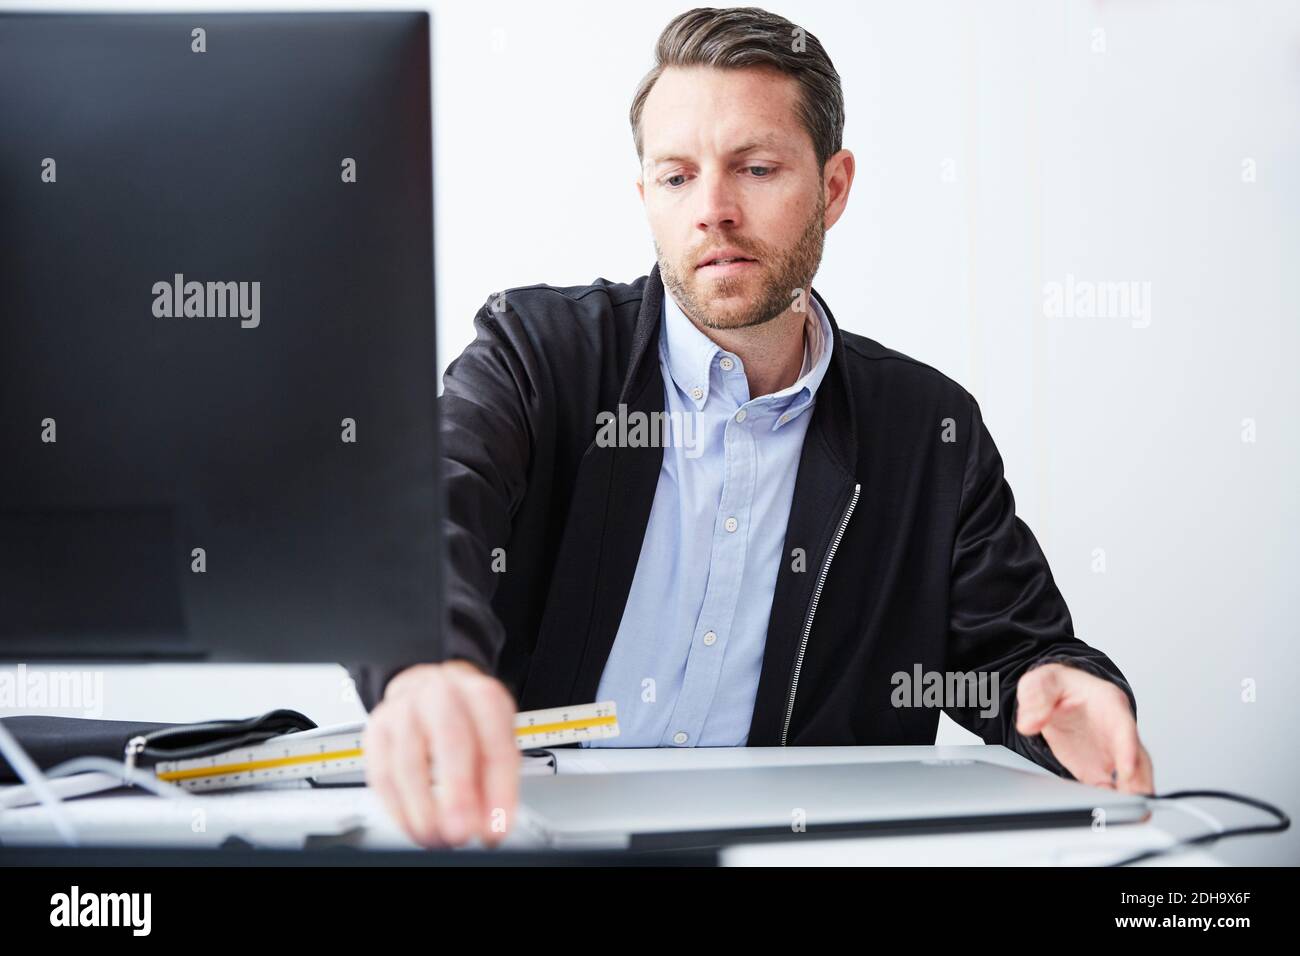 Serious architect using computer at desk in creative office Stock Photo